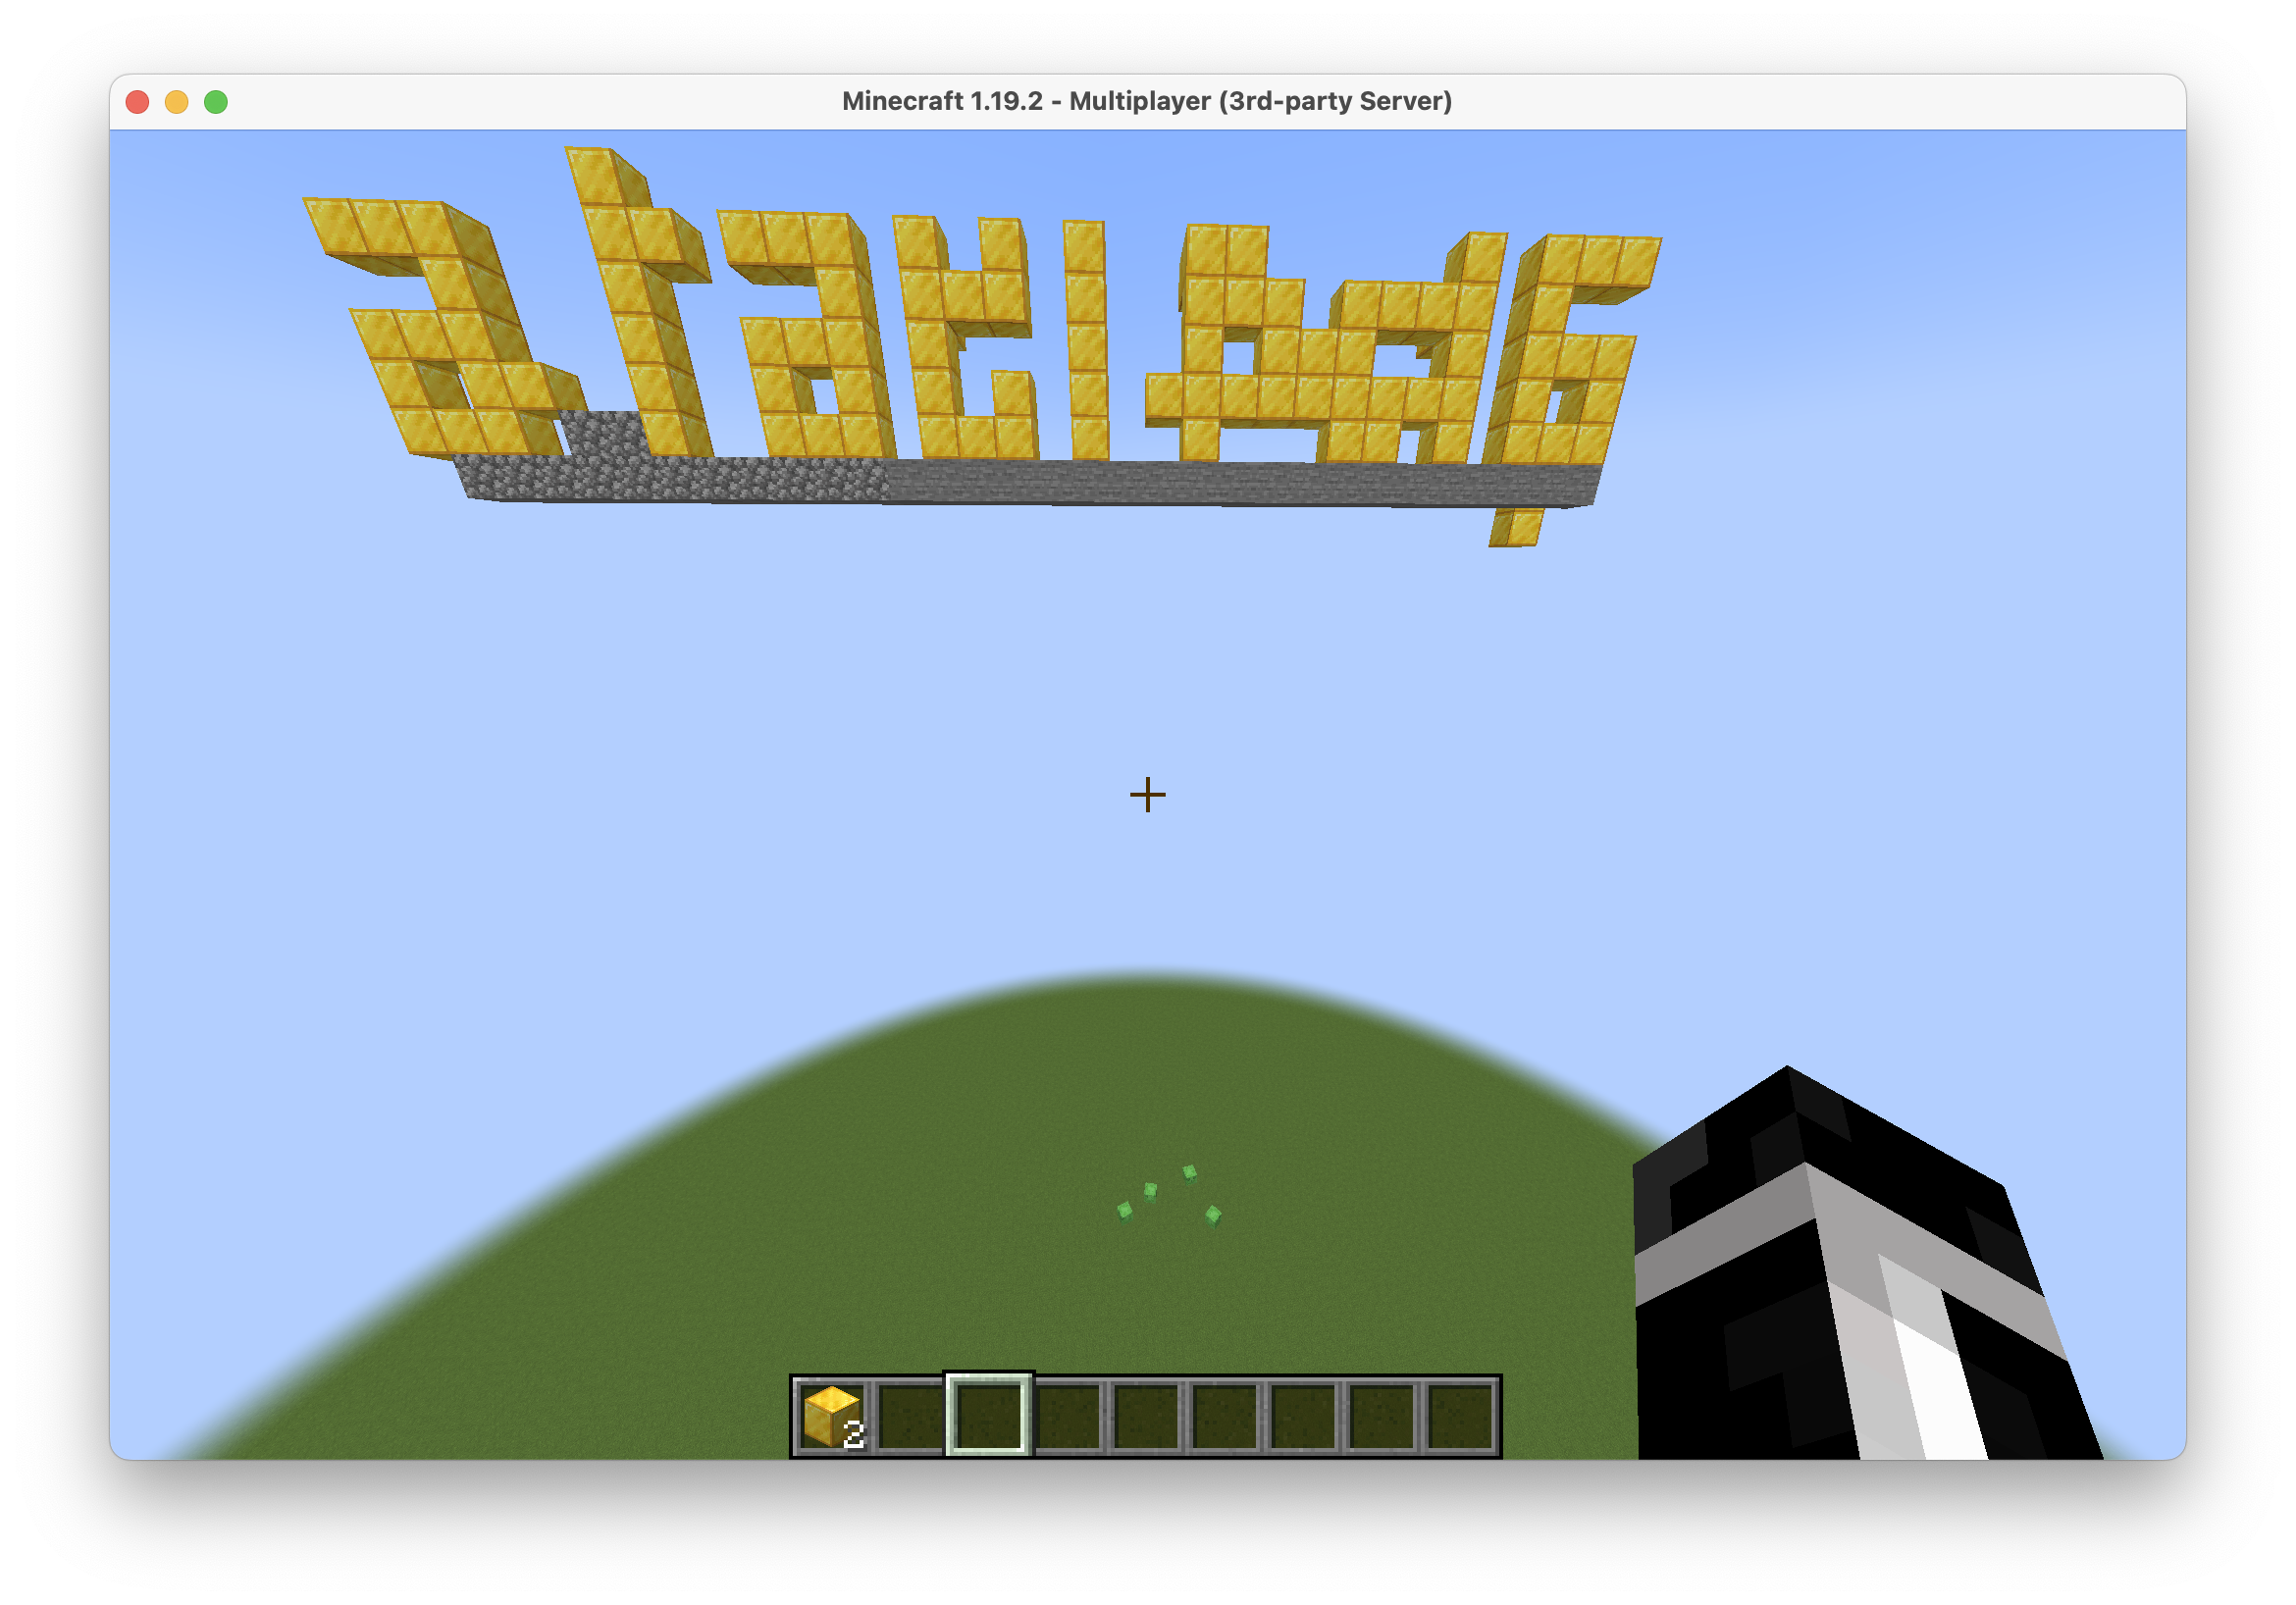 screenshot of minecraft, showing garbled text spelled out with gold blocks